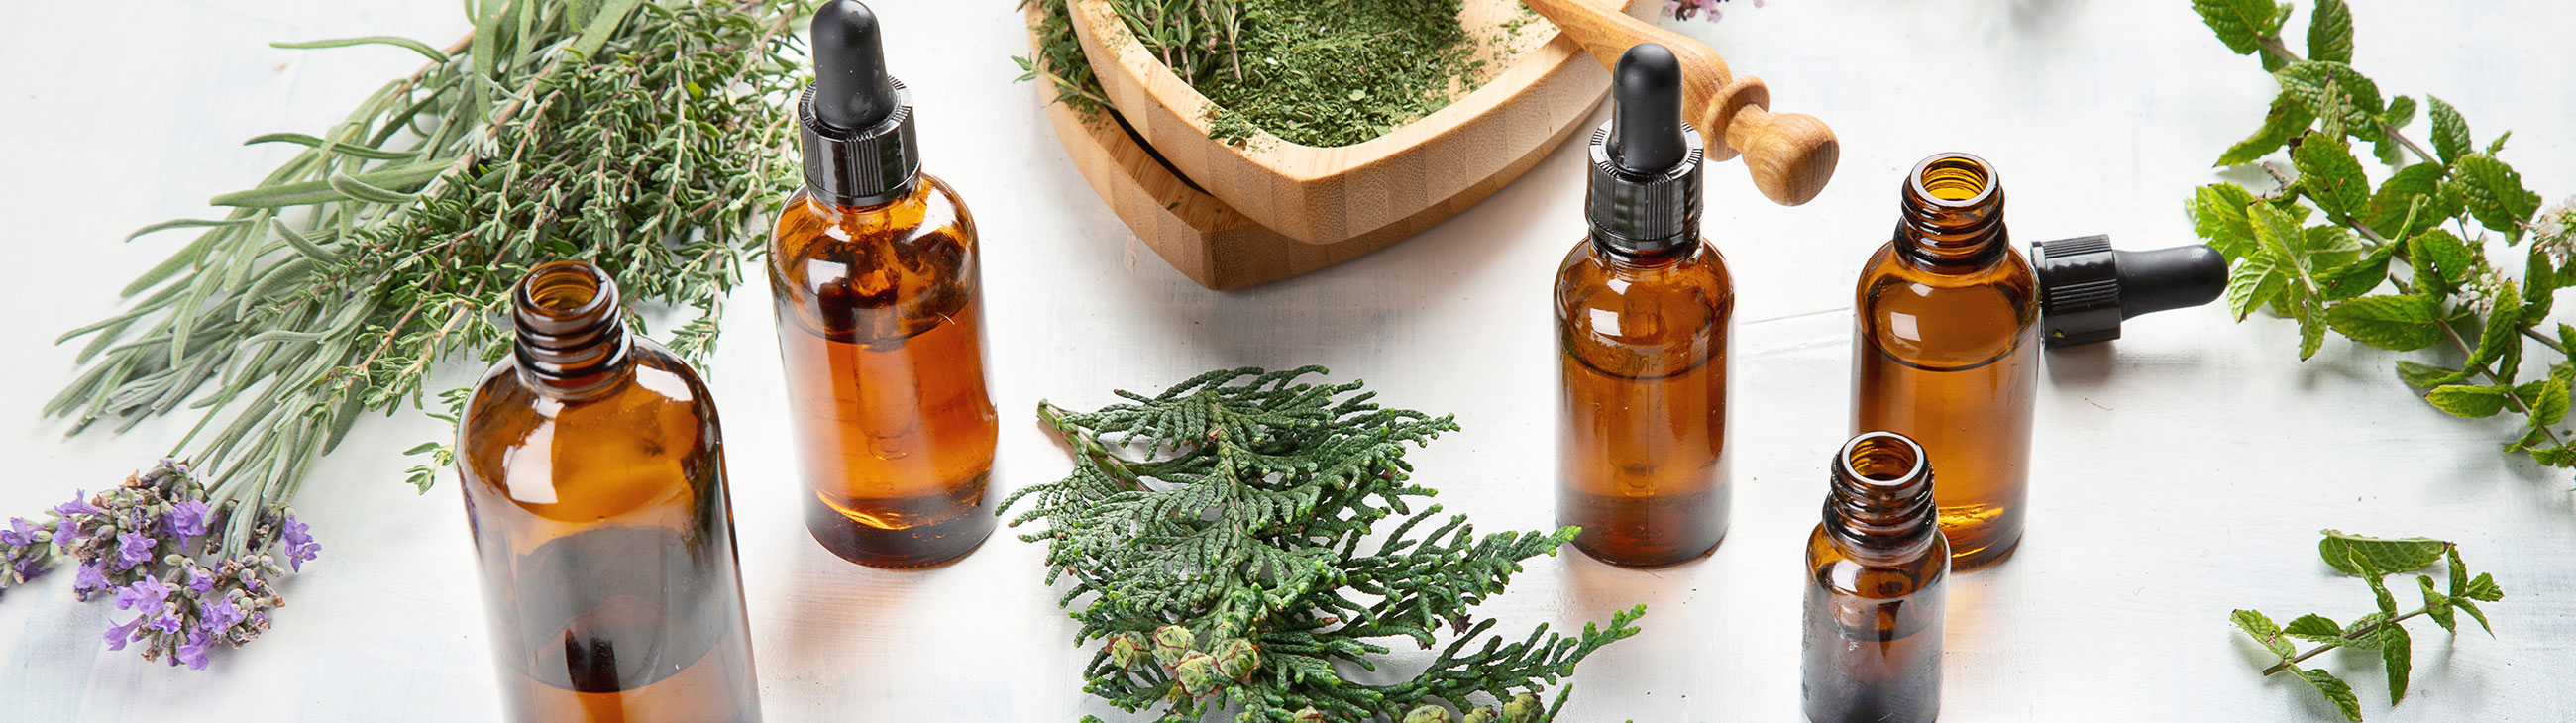 I have eczema: should I avoid essential oils?